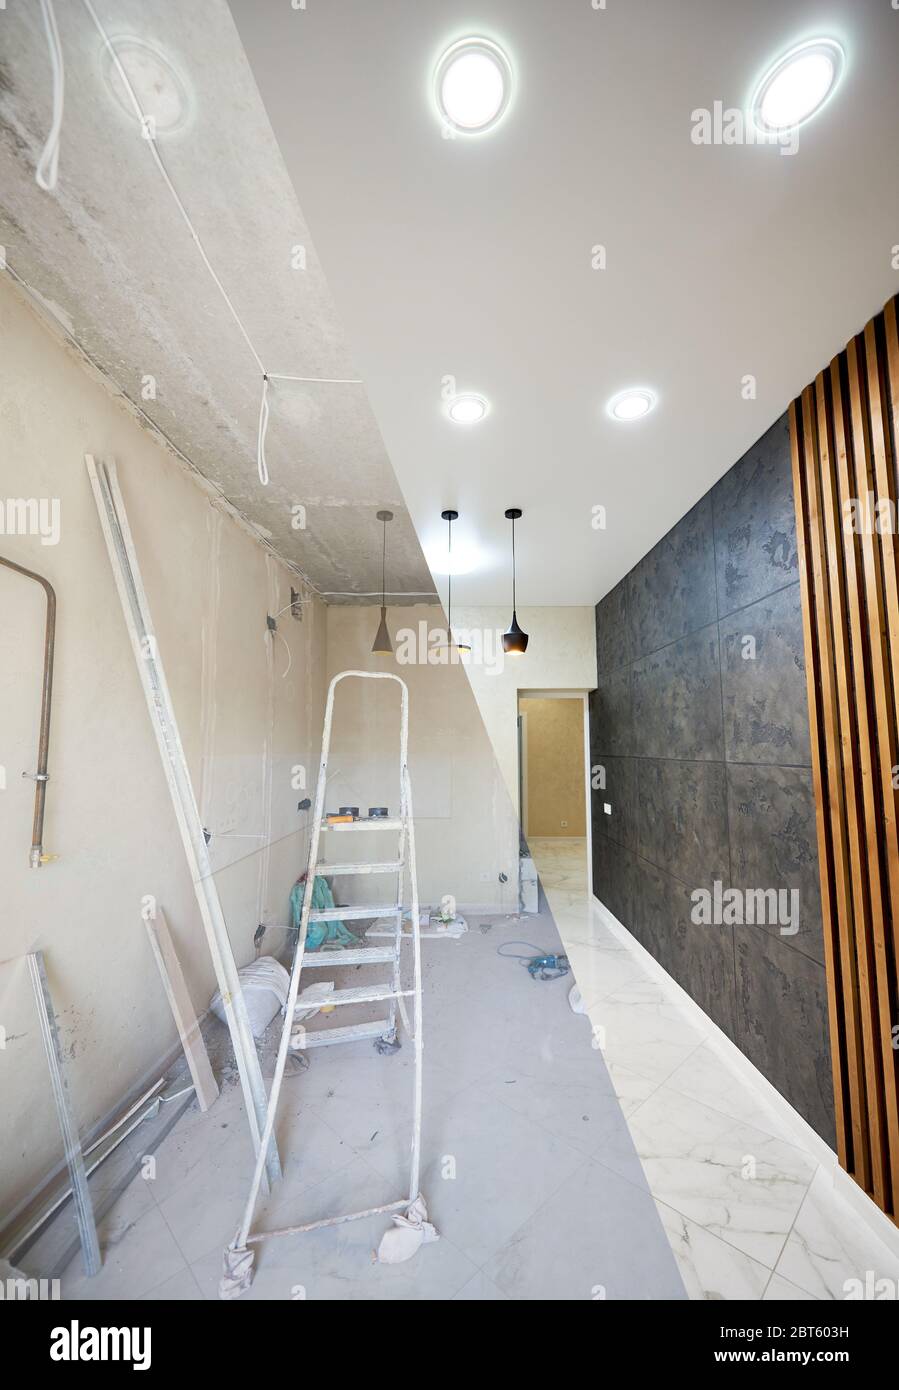 Renovation concept, new kitchen before renovation works and after, shiny tiles on the floor, modern chandeliers hanging from ceiling vs messy room with ladder in the middle Stock Photo